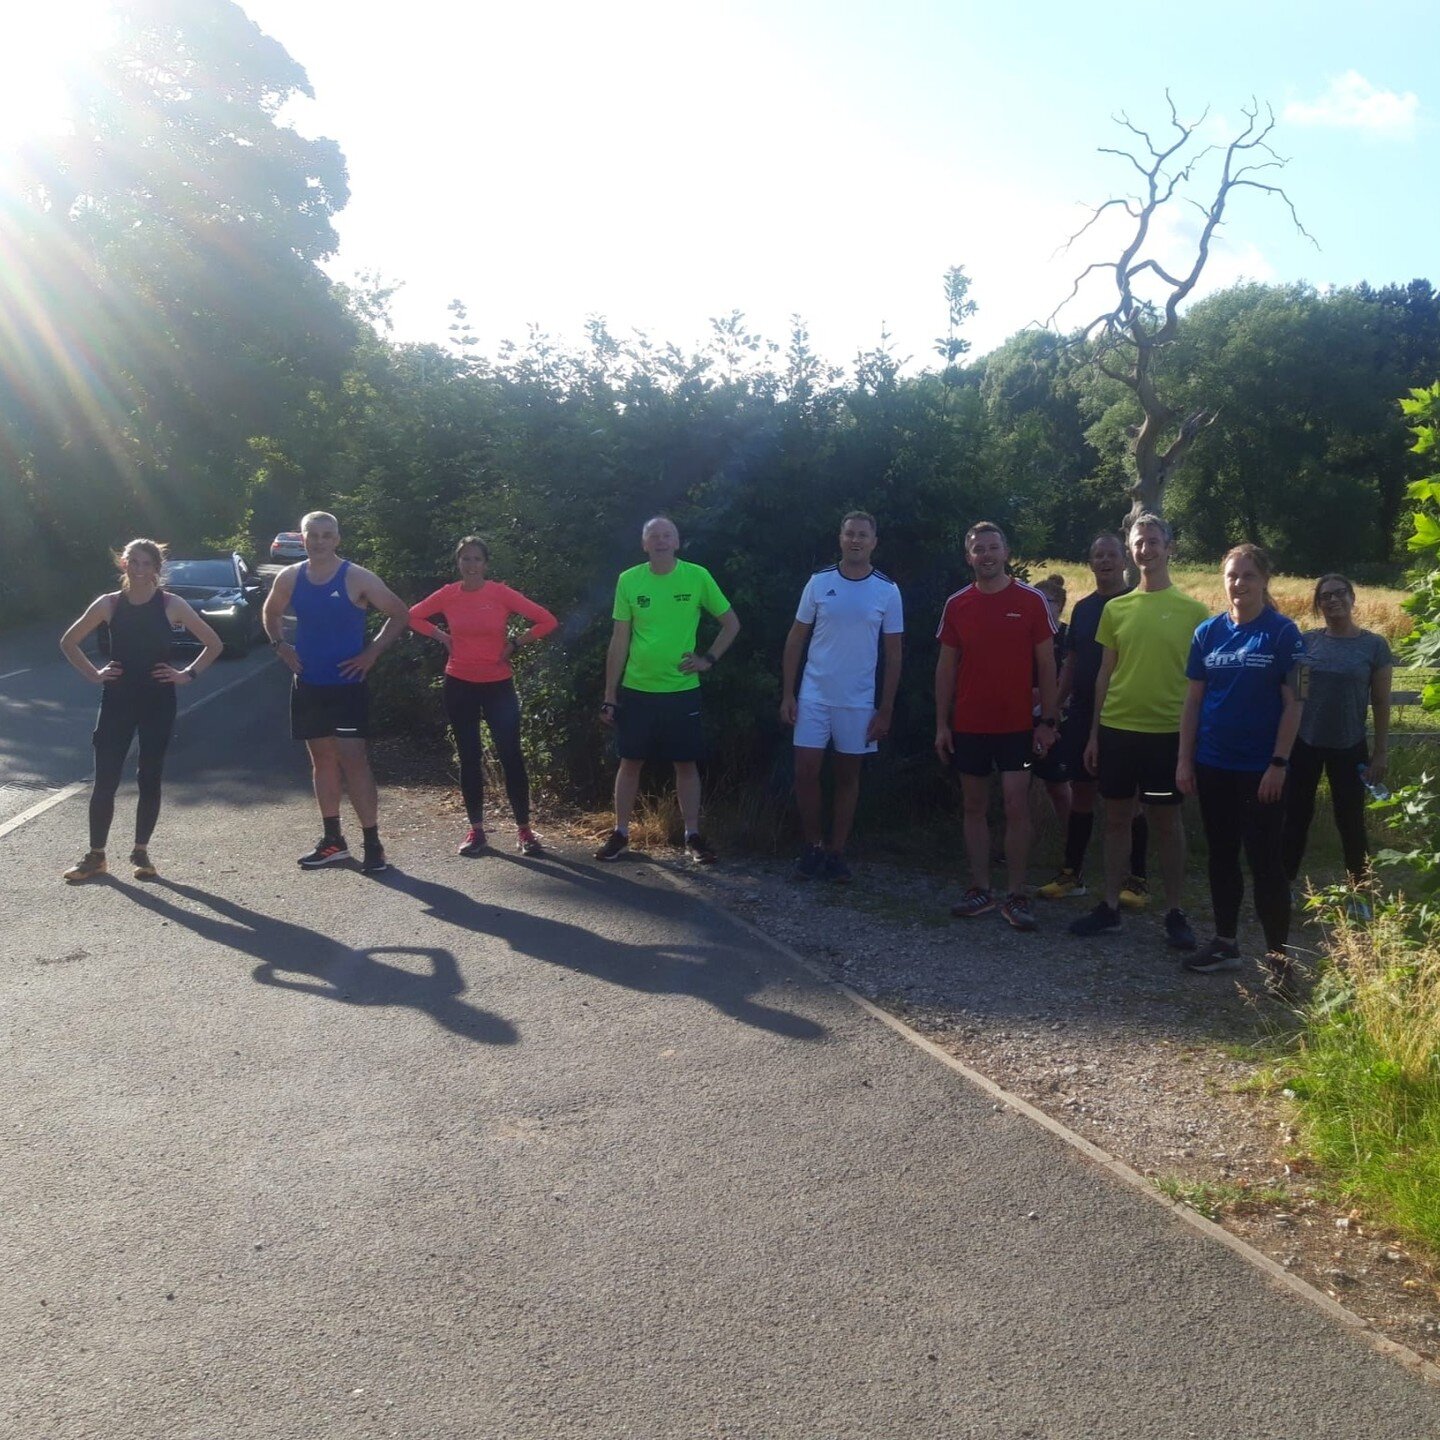 Tuesday Speed Session ☀️
What a glorious evening we had for training last night! Great effort everyone and well done on those hills reps! 👏👏

Some of our members also took part in the Wizard 5 Trail Race last night - a beautiful 5 mile race on the 